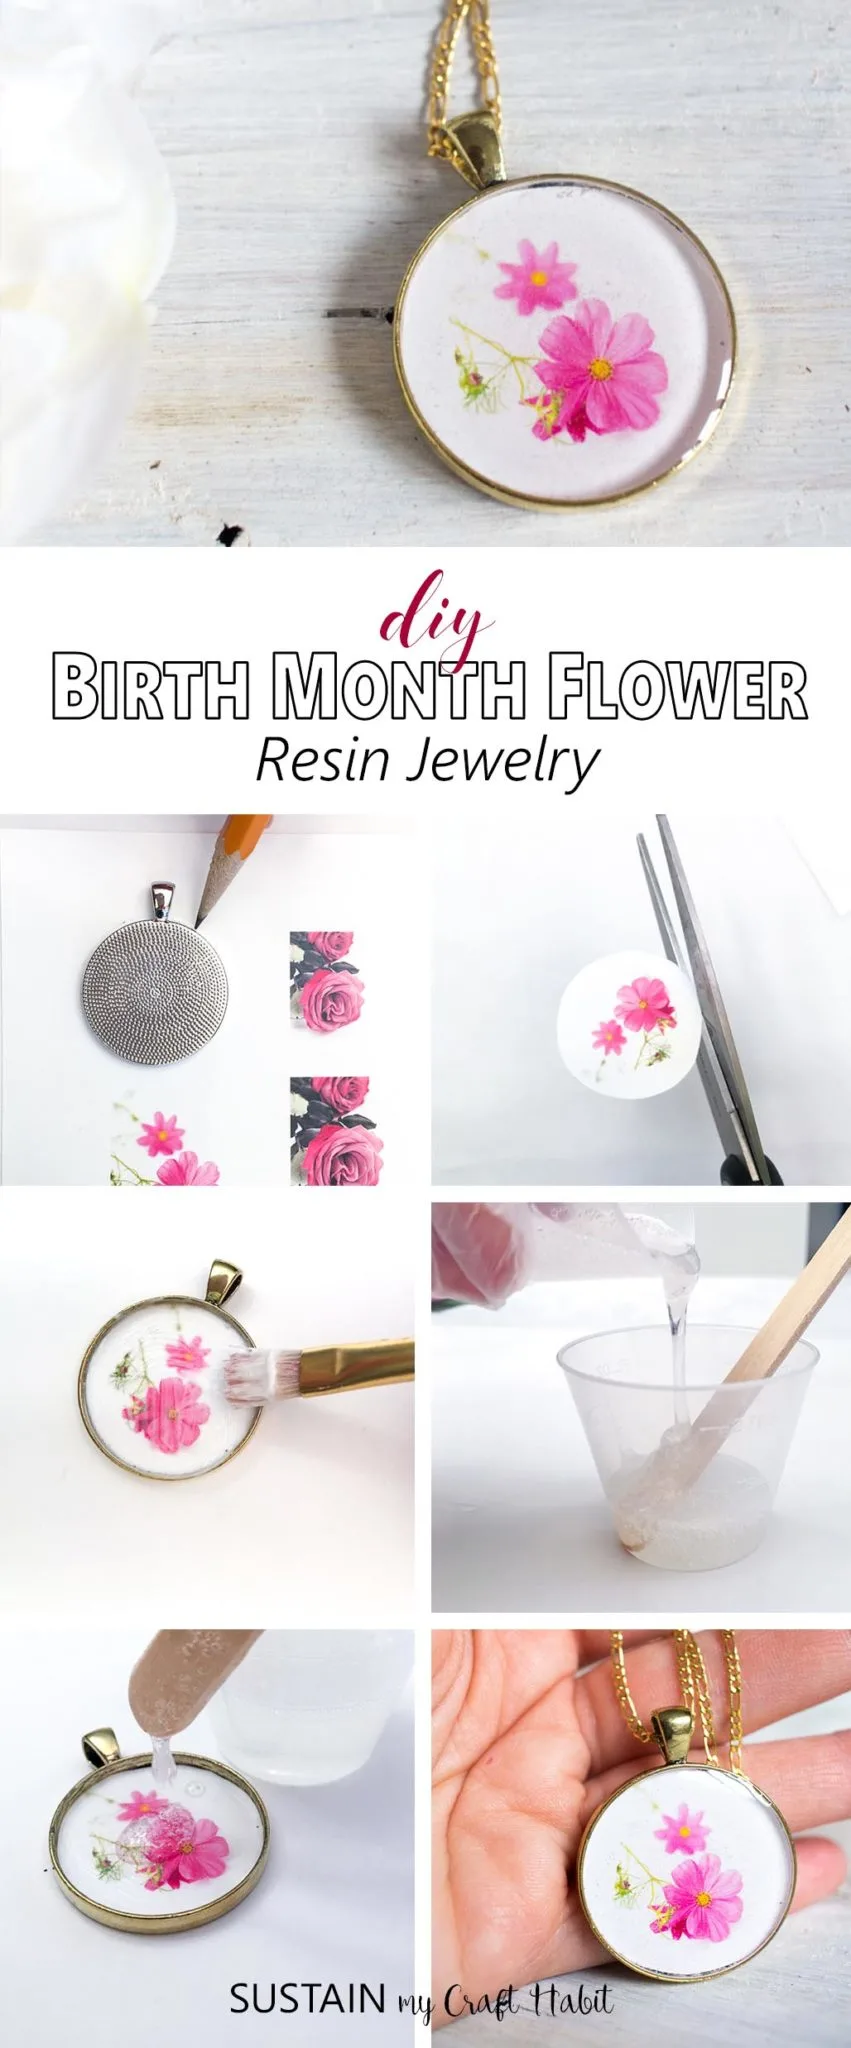 Such a thoughtful and personalized handmade gift idea! Learn how to make resin jewelry with this step-by-step tutorial. 